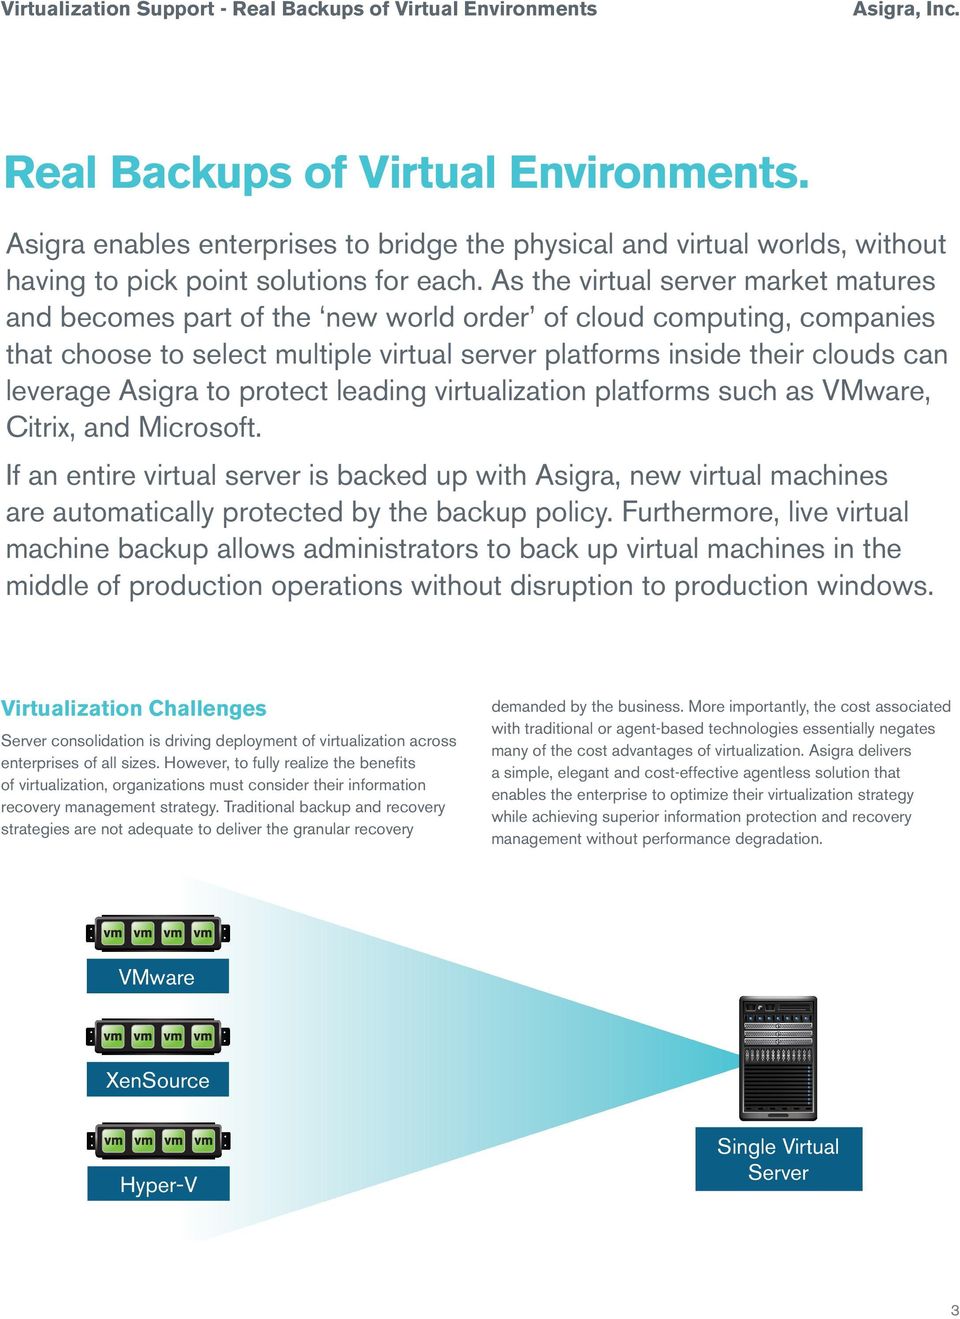 Asigra to protect leading virtualization platforms such as VMware, Citrix, and Microsoft.